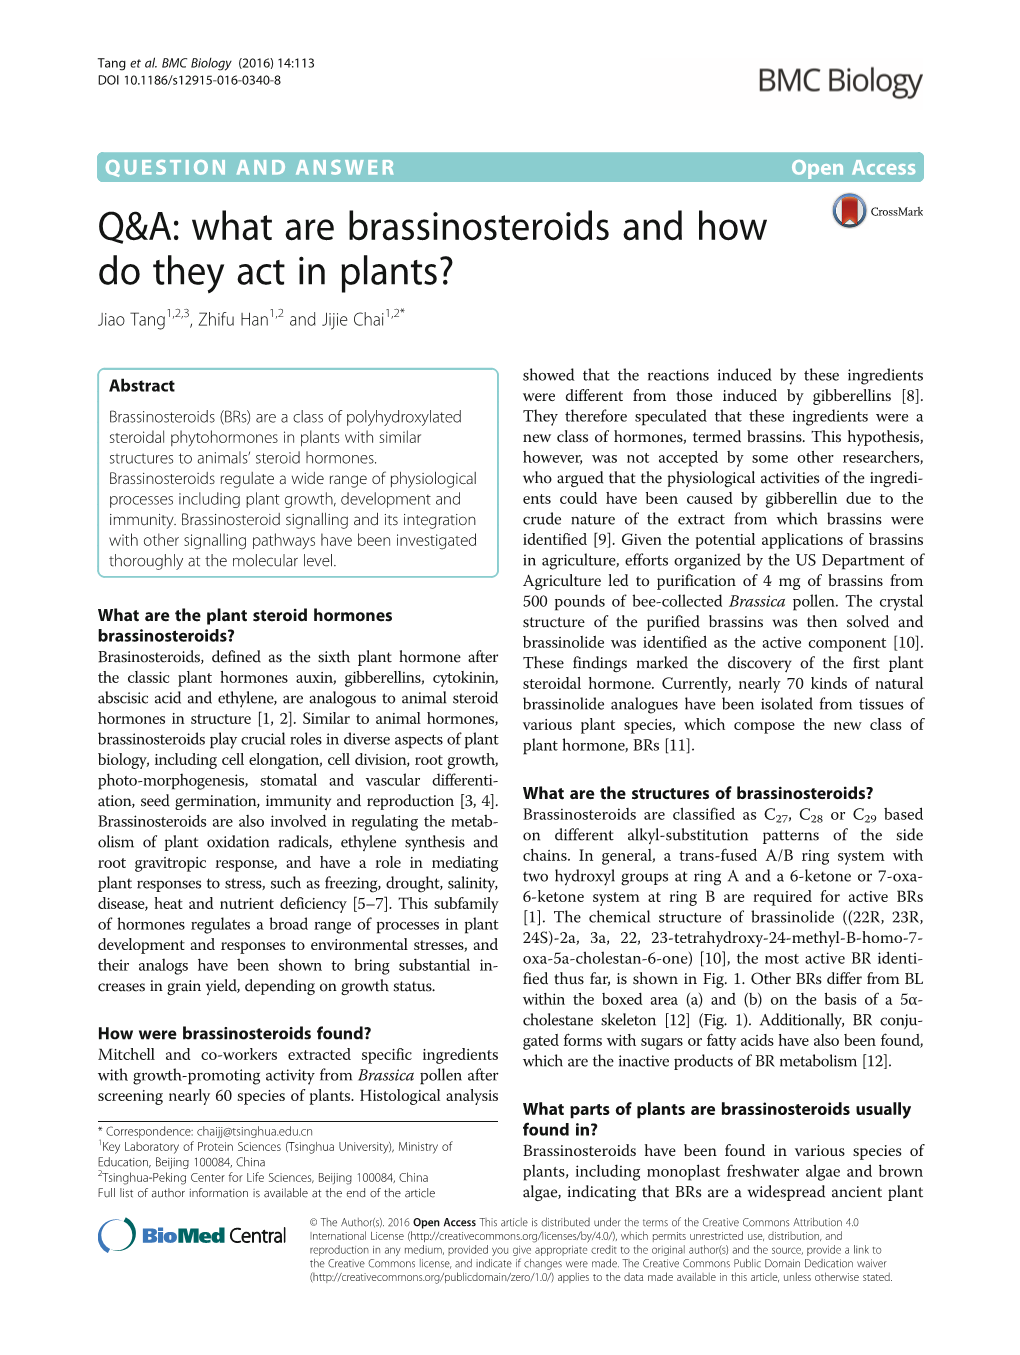 Q&A: What Are Brassinosteroids and How Do They Act in Plants?